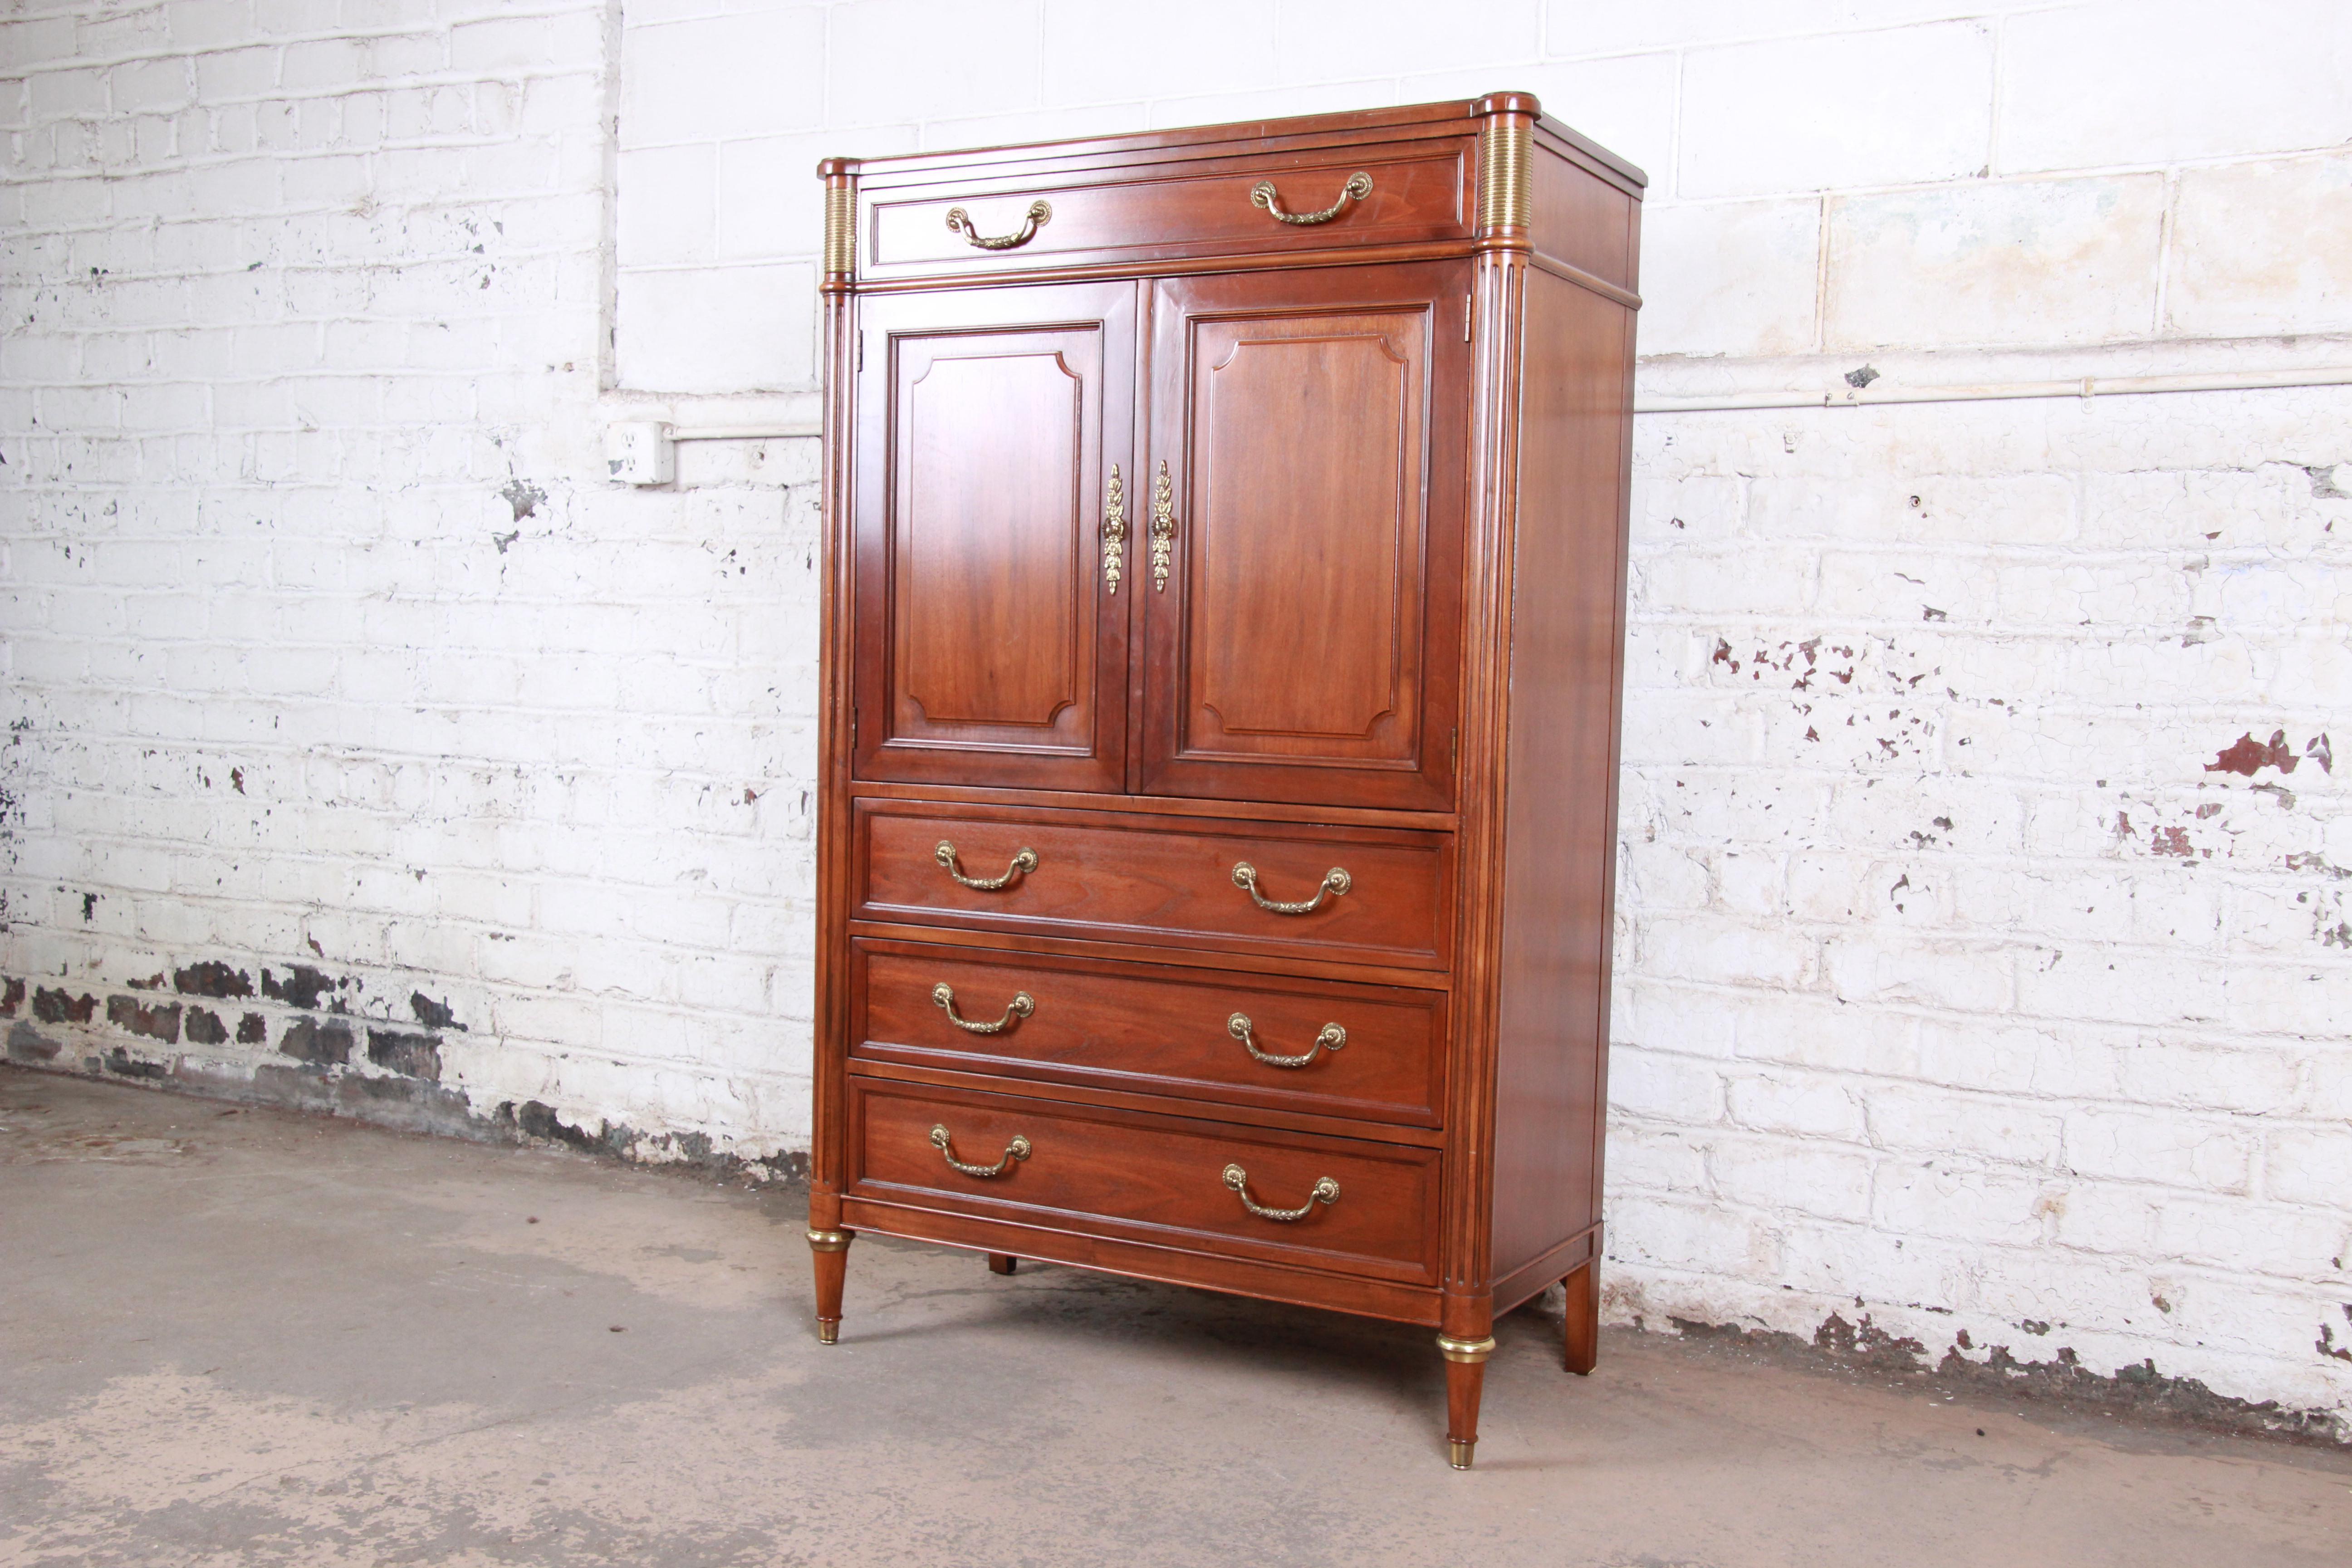 A gorgeous Louis XVI style French Regency gentleman's chest of drawers by Baker Furniture. The dresser features beautiful wood grain and nice brass details. It offers ample storage, with four dovetailed drawers as well as three cubbies and open